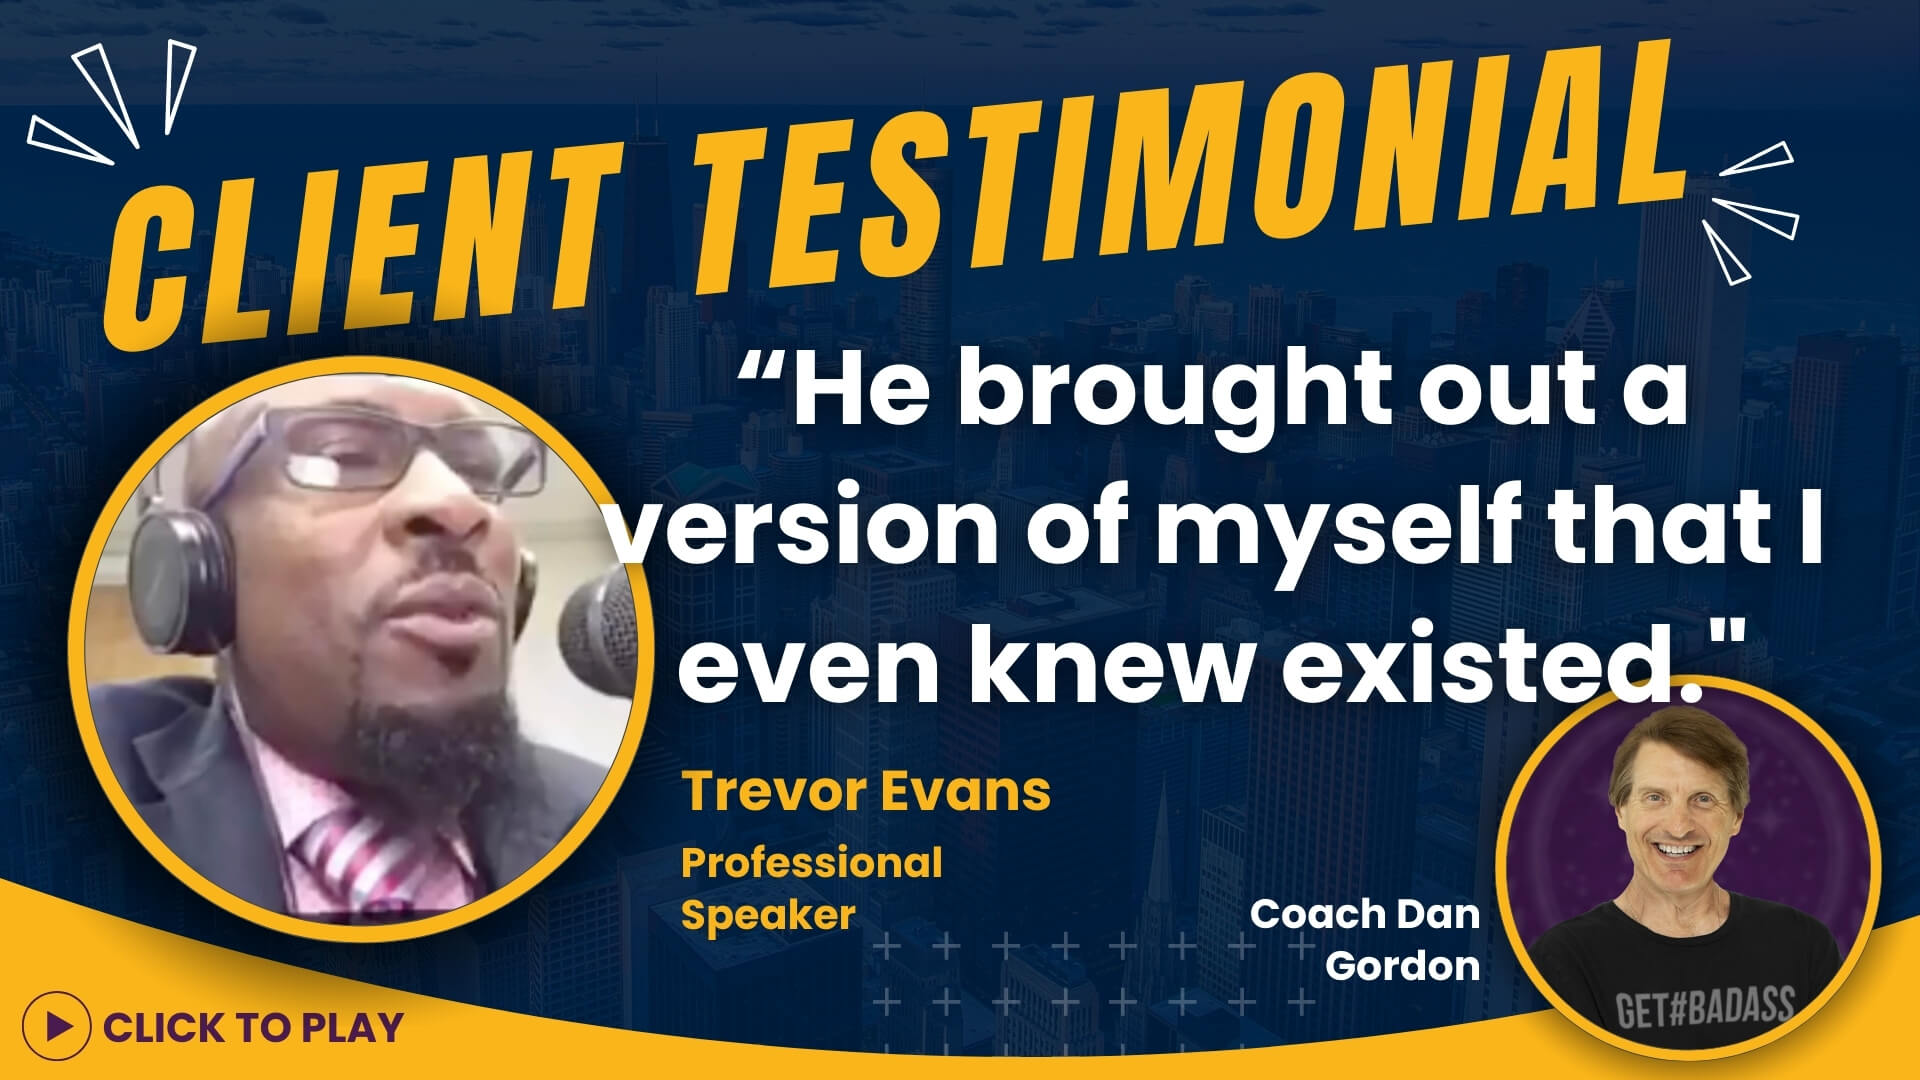 Trevor Evans, a Professional Speaker, in a testimonial for Coach Dan Gordon, citing personal growth and self-discovery.